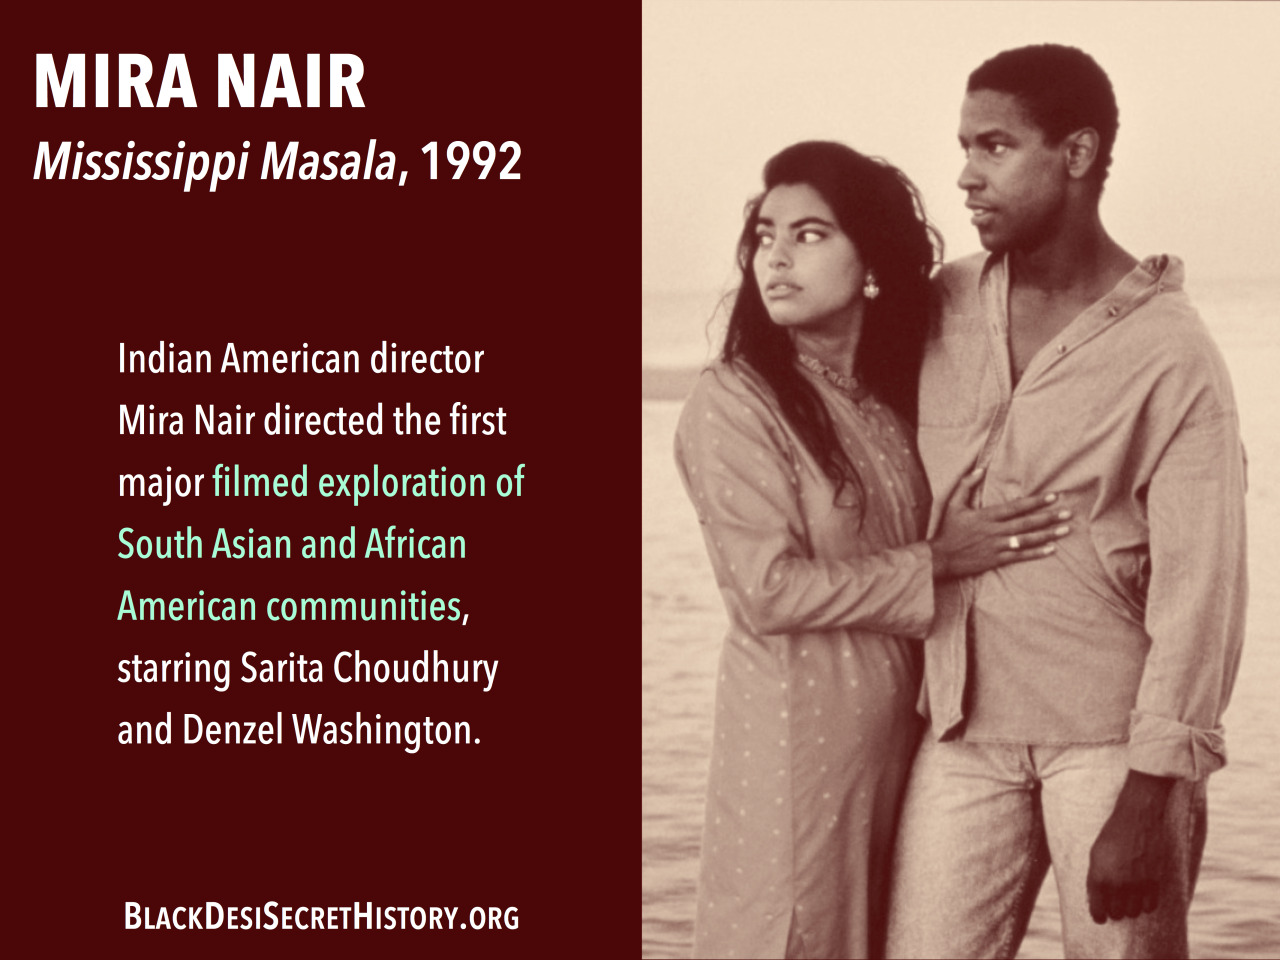 MIRA NAIR, Mississippi Masala, 1992: Indian American director Mira Nair directed the first major filmed exploration of South Asian and African American communities, starring Sarita Choudhury and Denzel Washington.